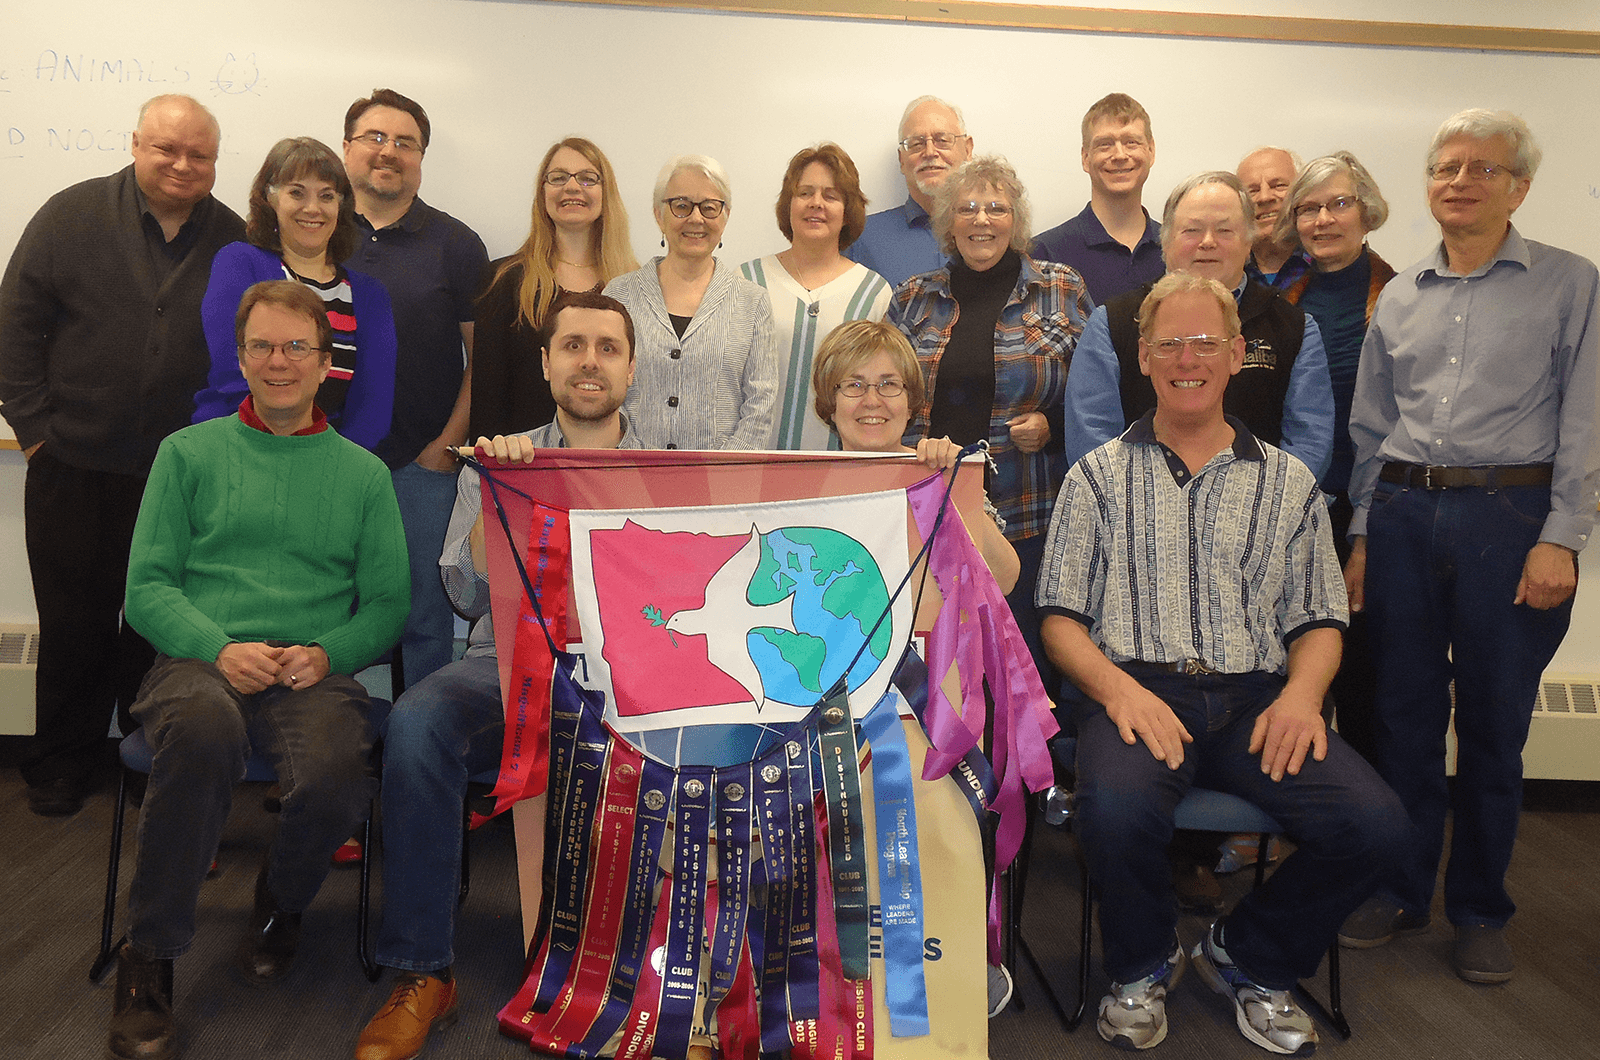 Members of the Minnesota Returned Peace Corps Volunteers Toastmasters club pose with their Toastmasters banner and Peace Corp logo.